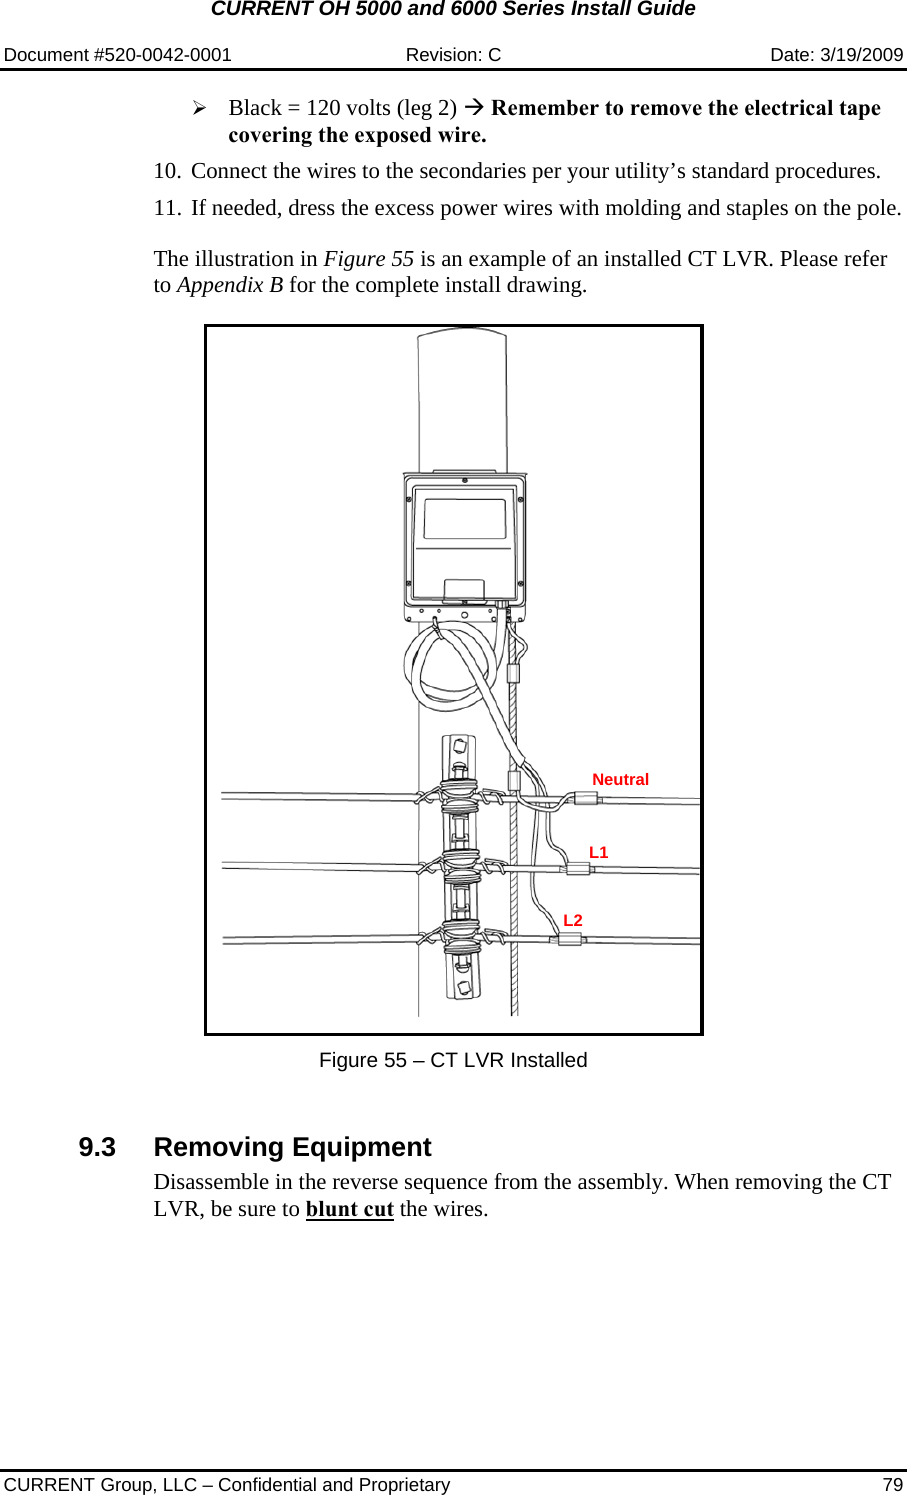 CURRENT OH 5000 and 6000 Series Install Guide  Document #520-0042-0001  Revision: C  Date: 3/19/2009  CURRENT Group, LLC – Confidential and Proprietary  79 ¾ Black = 120 volts (leg 2) Æ Remember to remove the electrical tape covering the exposed wire. 10. Connect the wires to the secondaries per your utility’s standard procedures. 11. If needed, dress the excess power wires with molding and staples on the pole.   The illustration in Figure 55 is an example of an installed CT LVR. Please refer to Appendix B for the complete install drawing.     Figure 55 – CT LVR Installed   9.3 Removing Equipment Disassemble in the reverse sequence from the assembly. When removing the CT LVR, be sure to blunt cut the wires.     Neutral L1 L2 